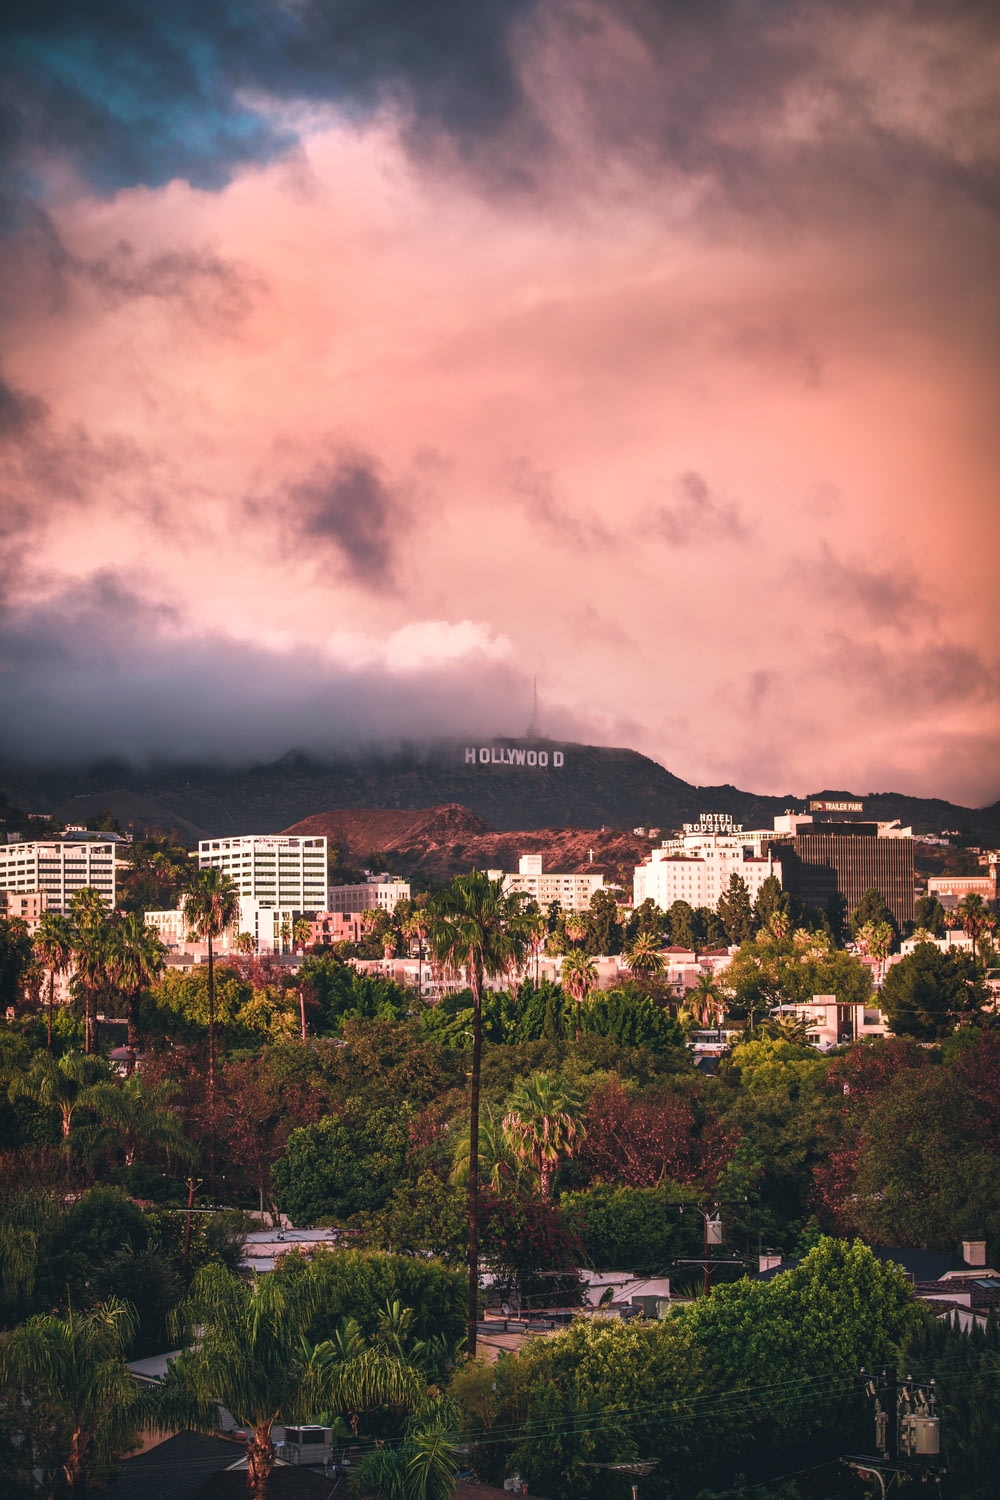 Hollywood sign from Los Angeles